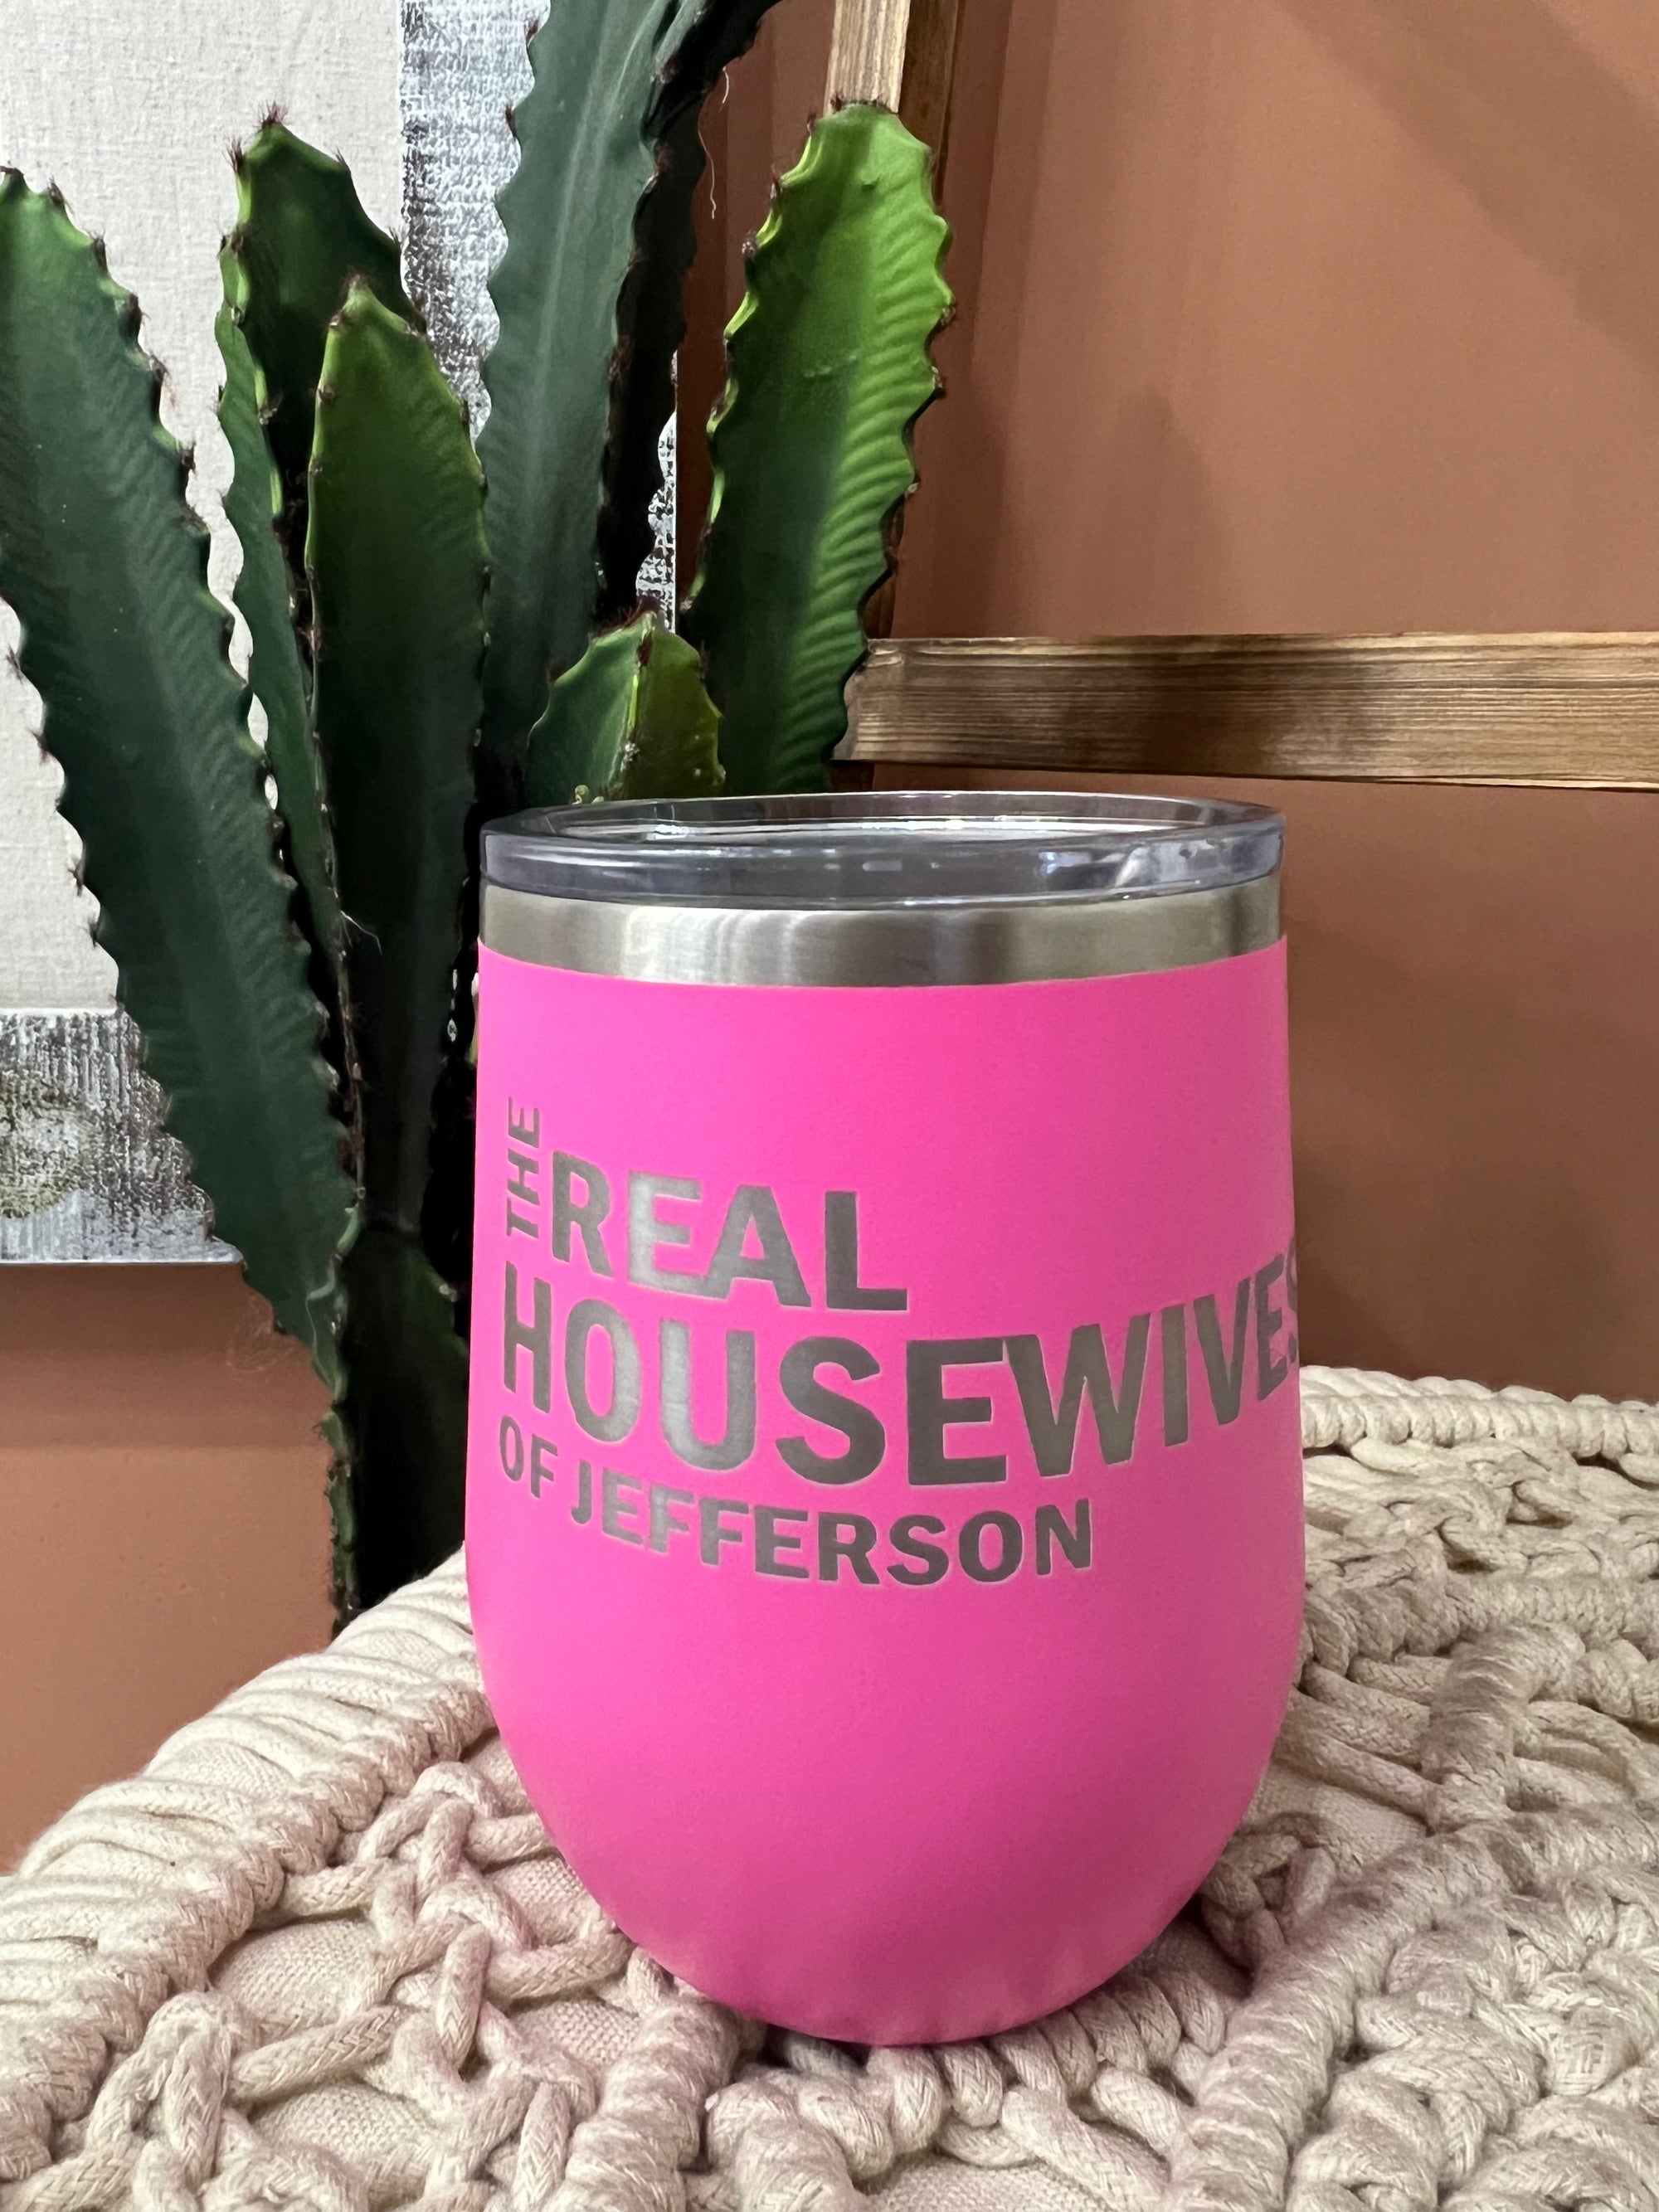 The Real Housewives of Jefferson Tumbler